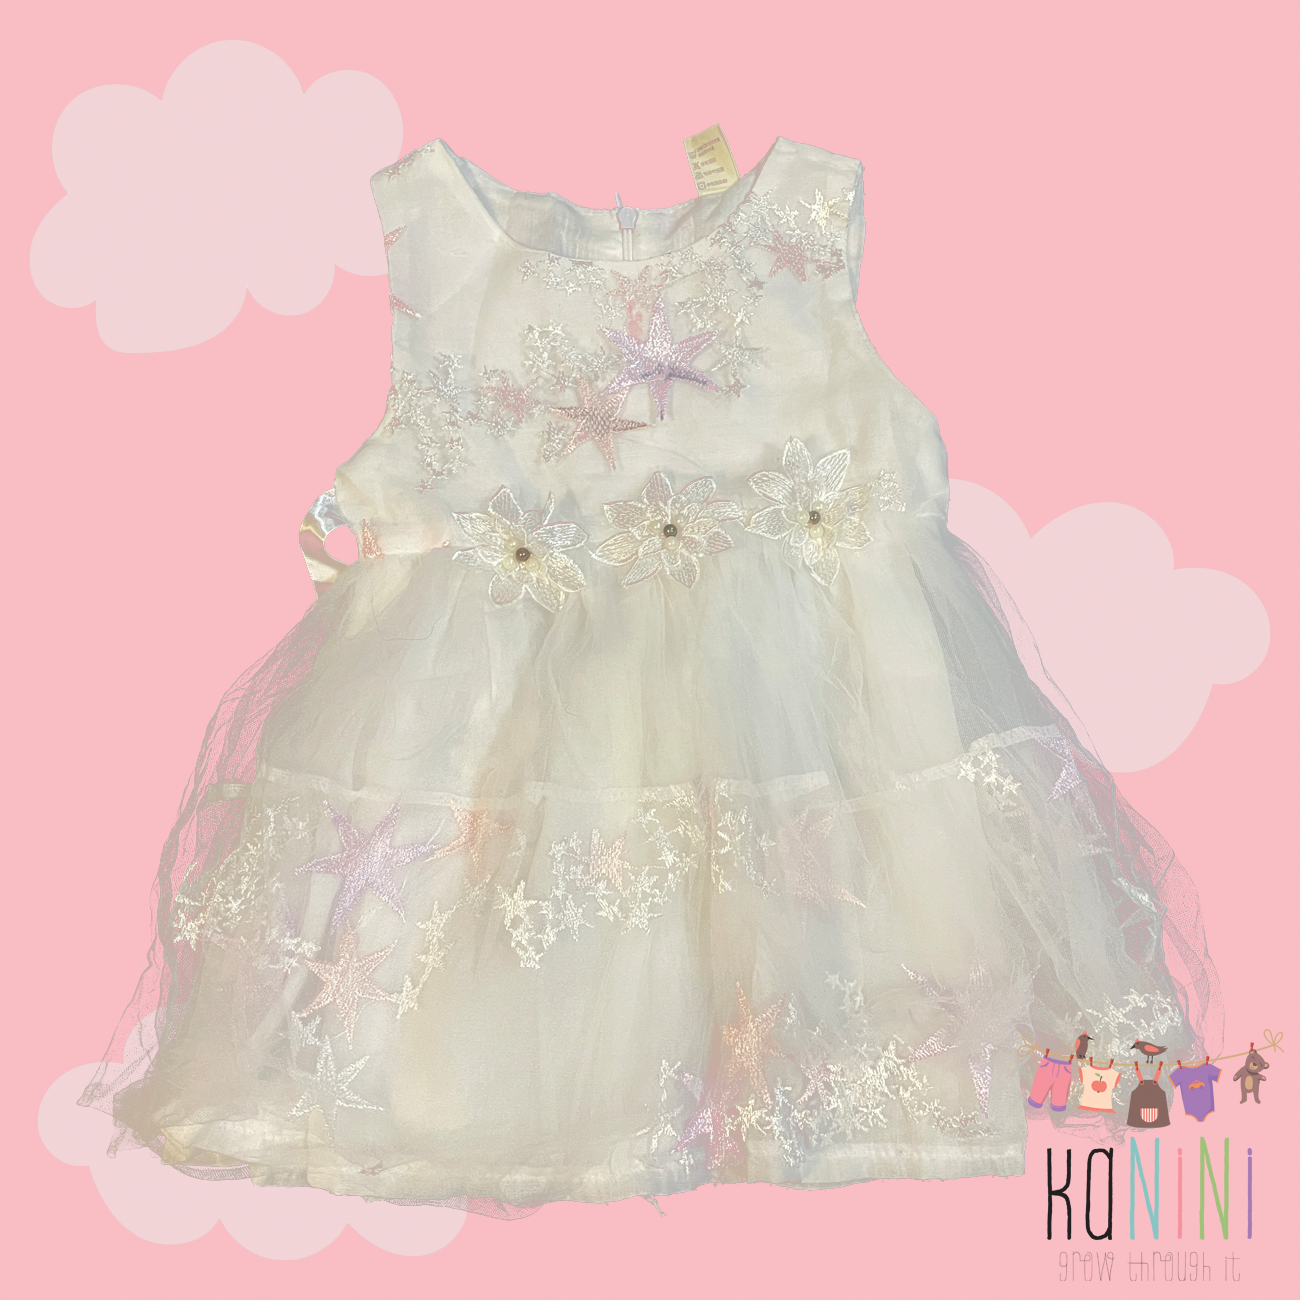 Featured image for “TGXE 6 - 12 Months Girls Formal Dress”